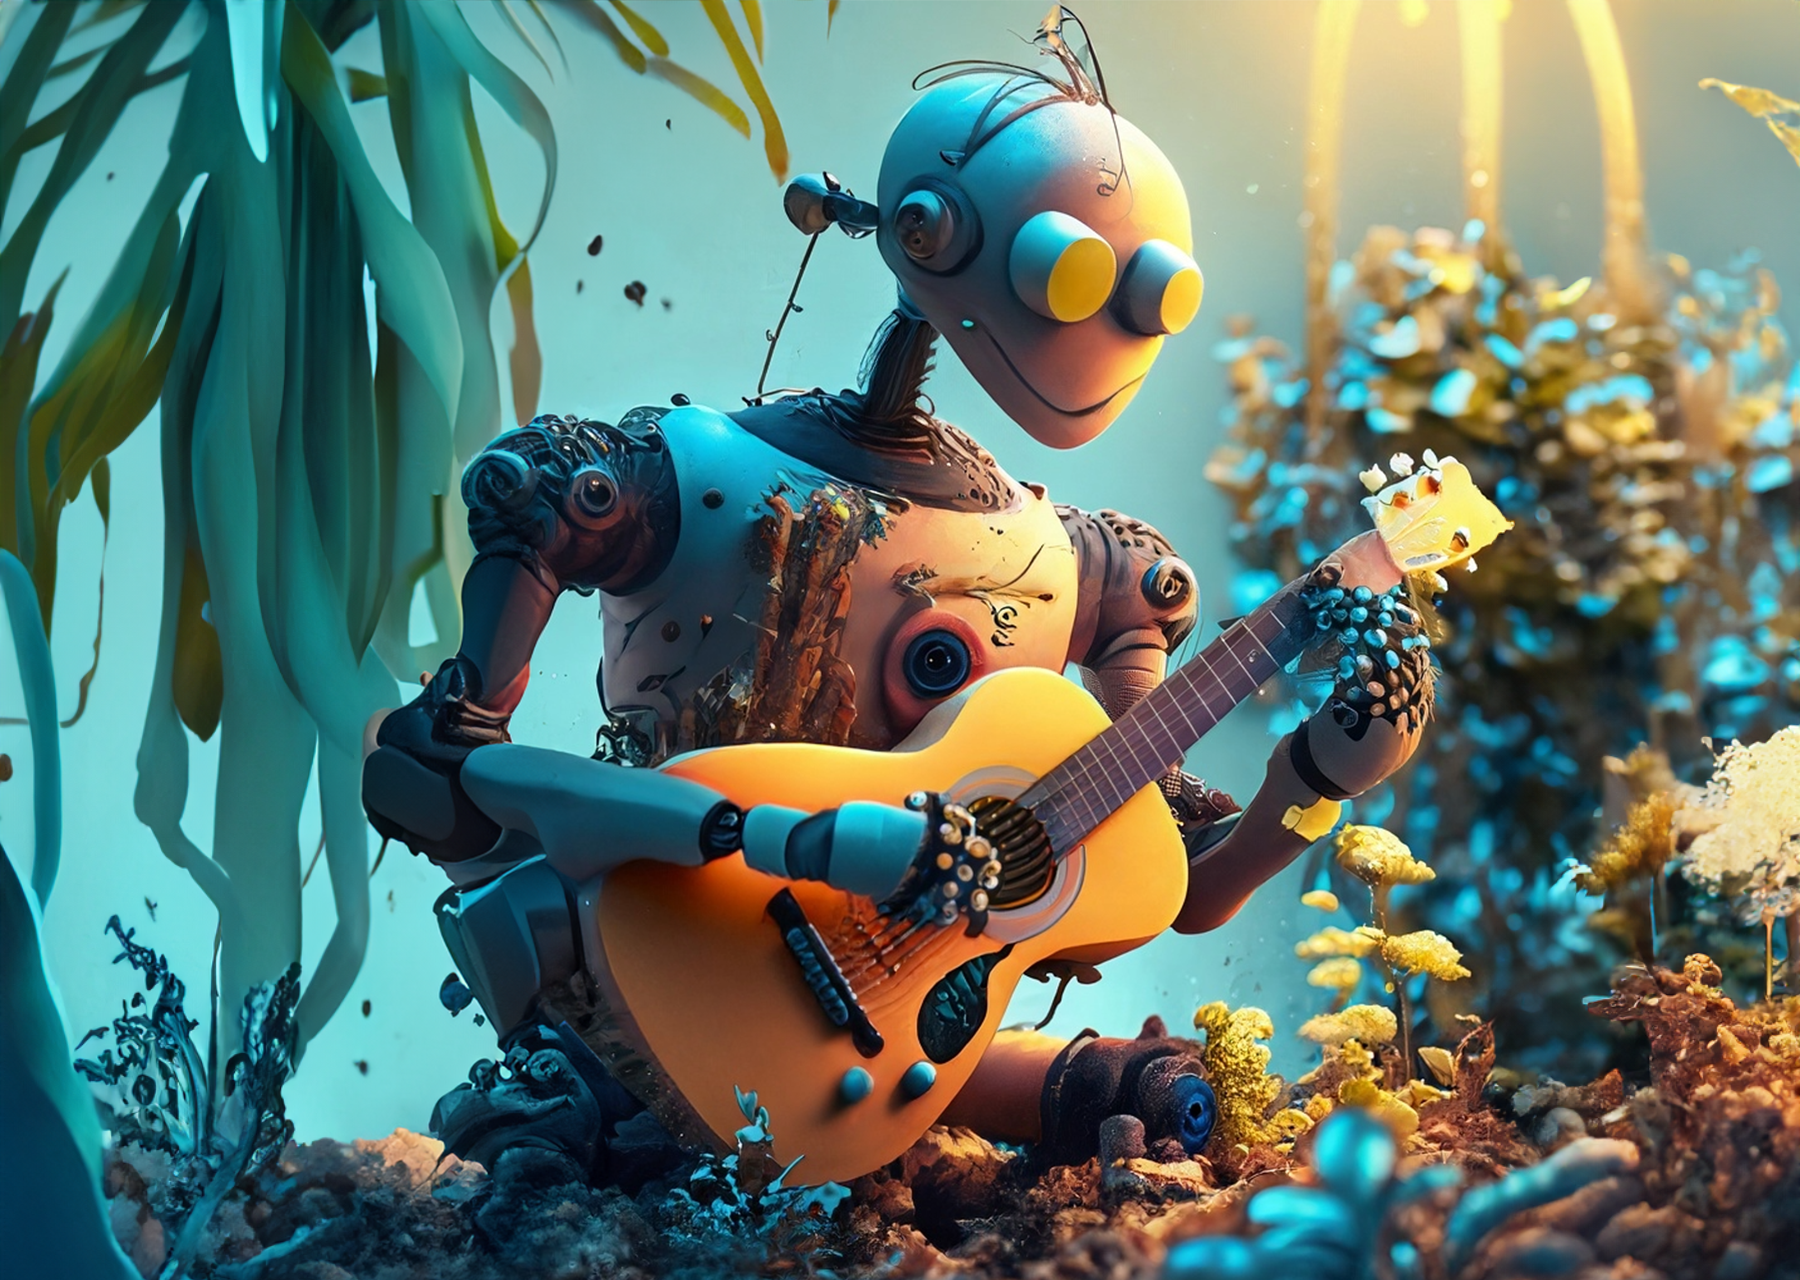 A robot playing acoustic guitar in a garden